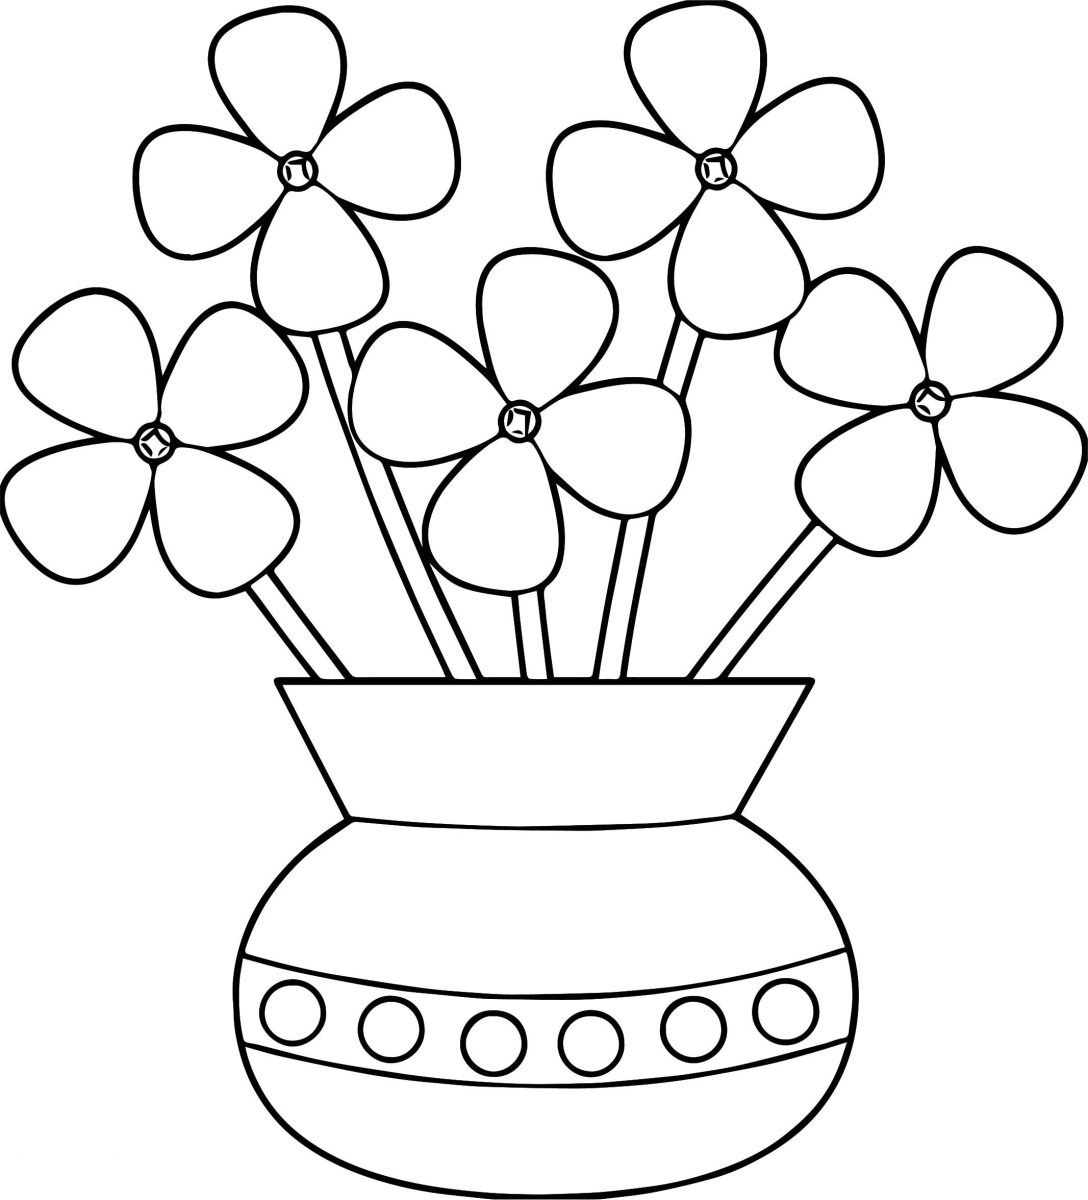 Download Flower Pot Coloring Pages Best Coloring Pages For Kids